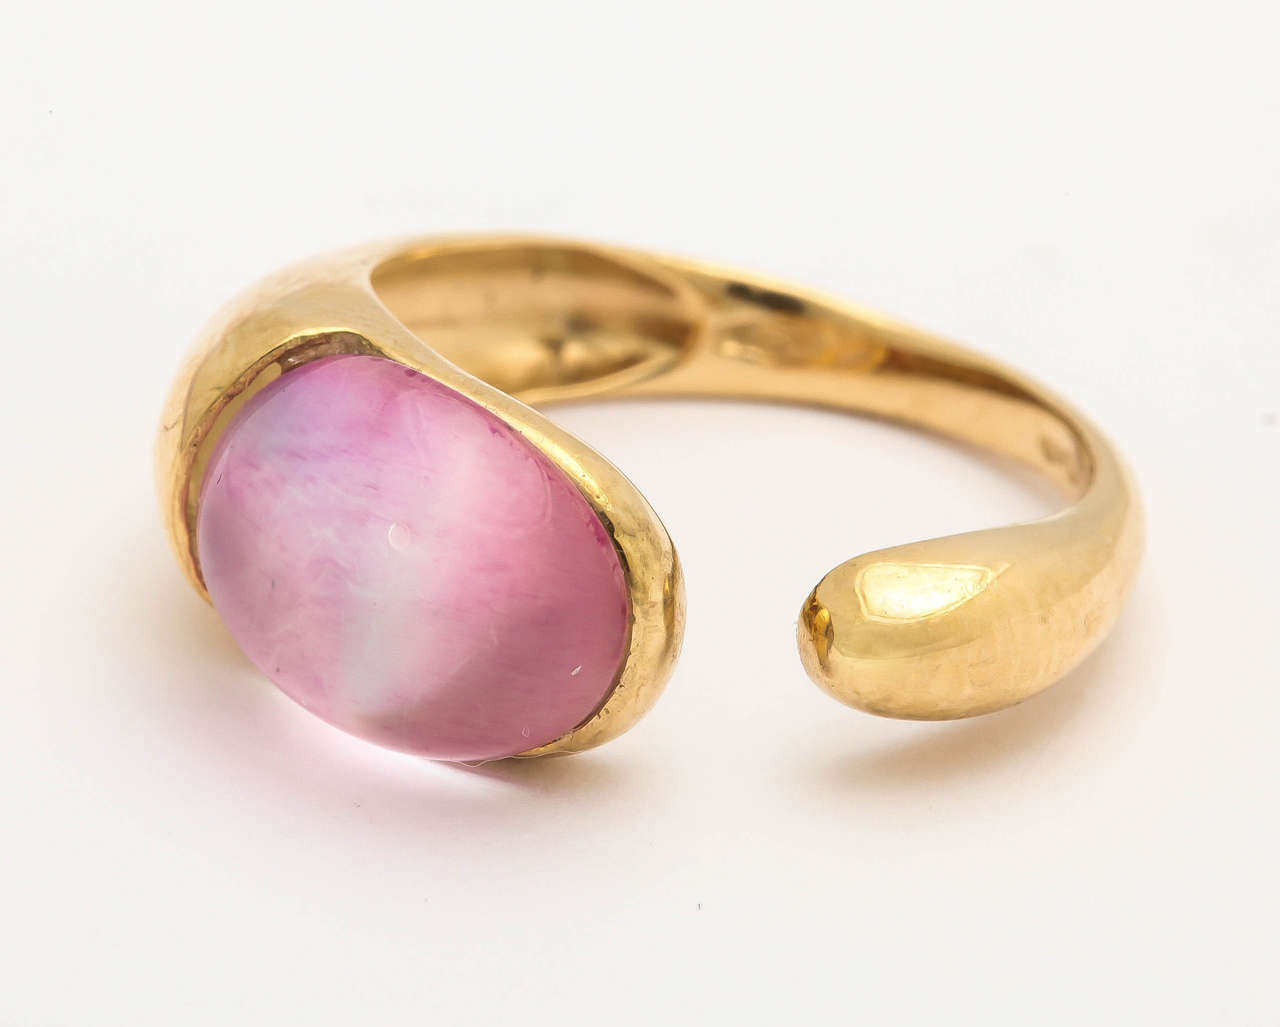 18Kt yellow gold gocce ring with pink mother of pearl stone.